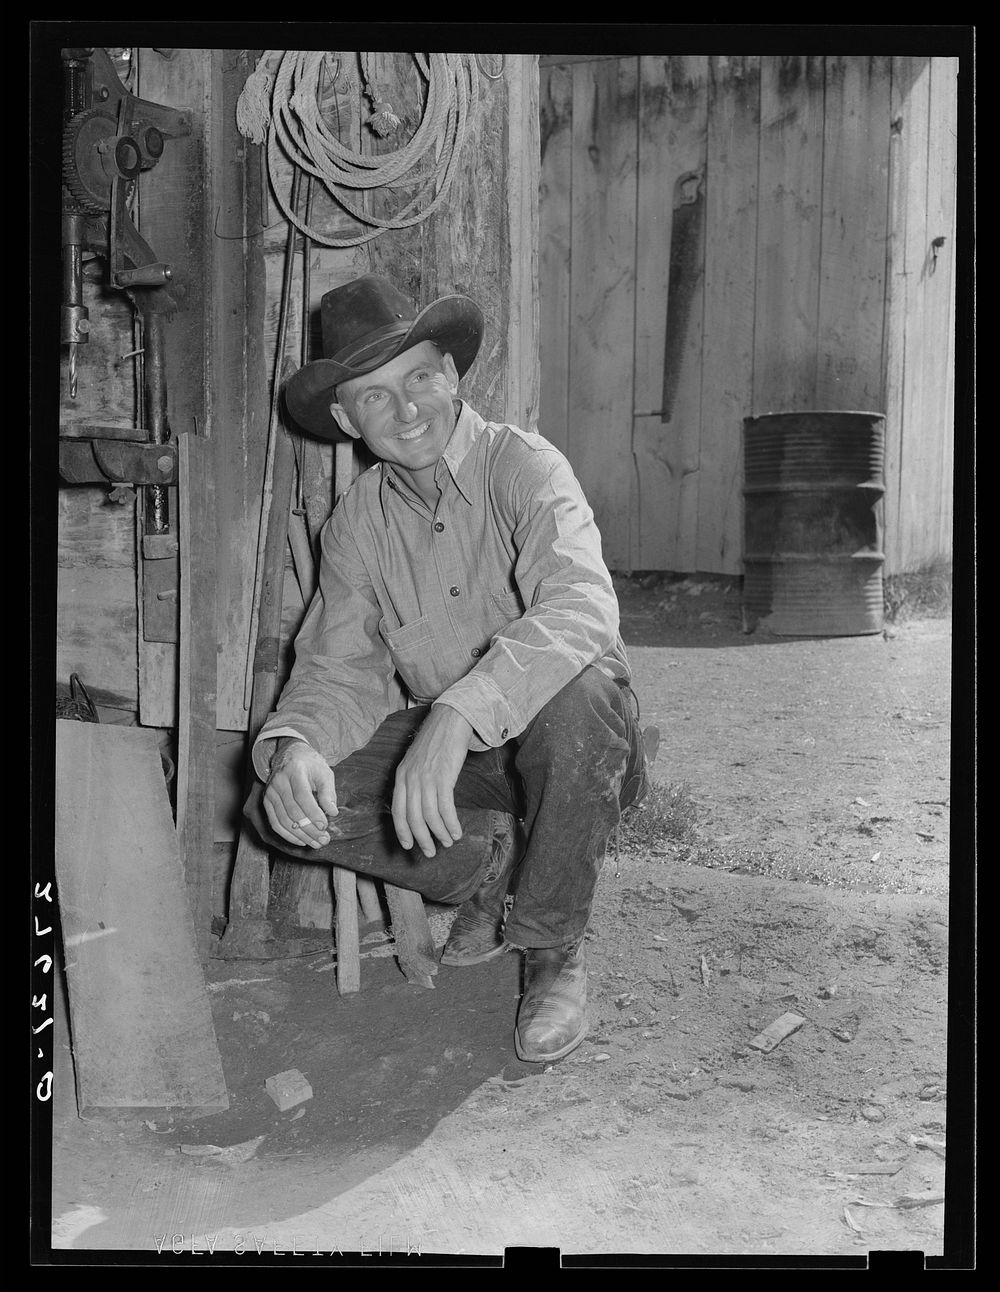 Cowhand. Quarter Circle 'U' Ranch, Montana. Sourced from the Library of Congress.